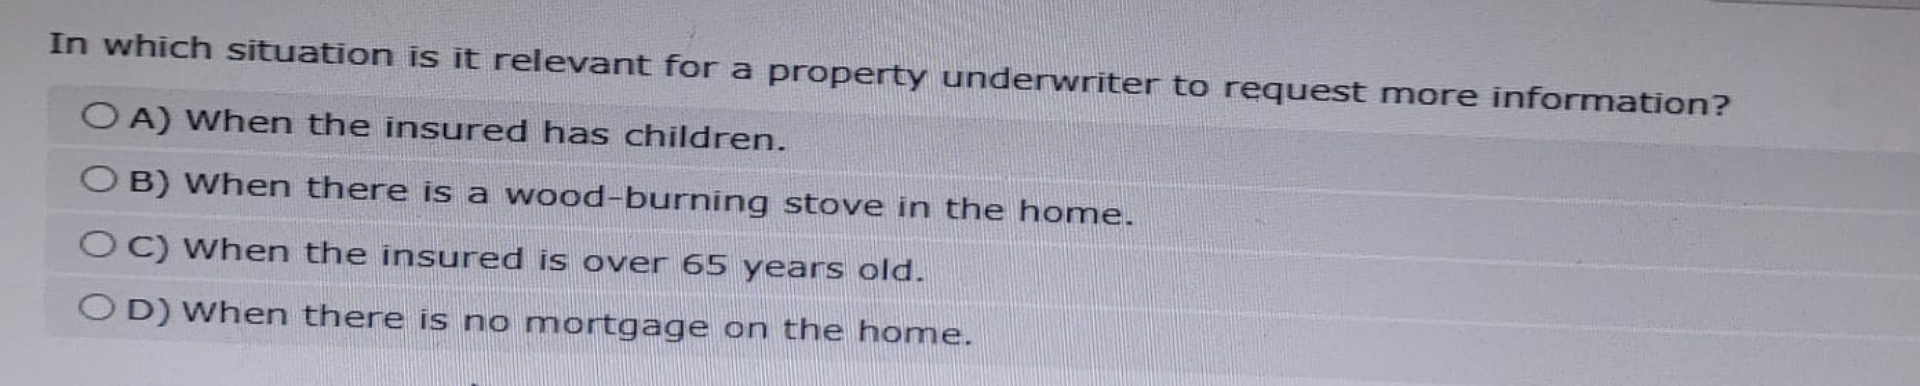 In which situation is it relevant for a property underwriter to request more information?
OA) When the insured has children.
OB) When there is a wood-burning stove in the home.
OC) When the insured is over 65 years old.
OD) When there is no mortgage on the home.